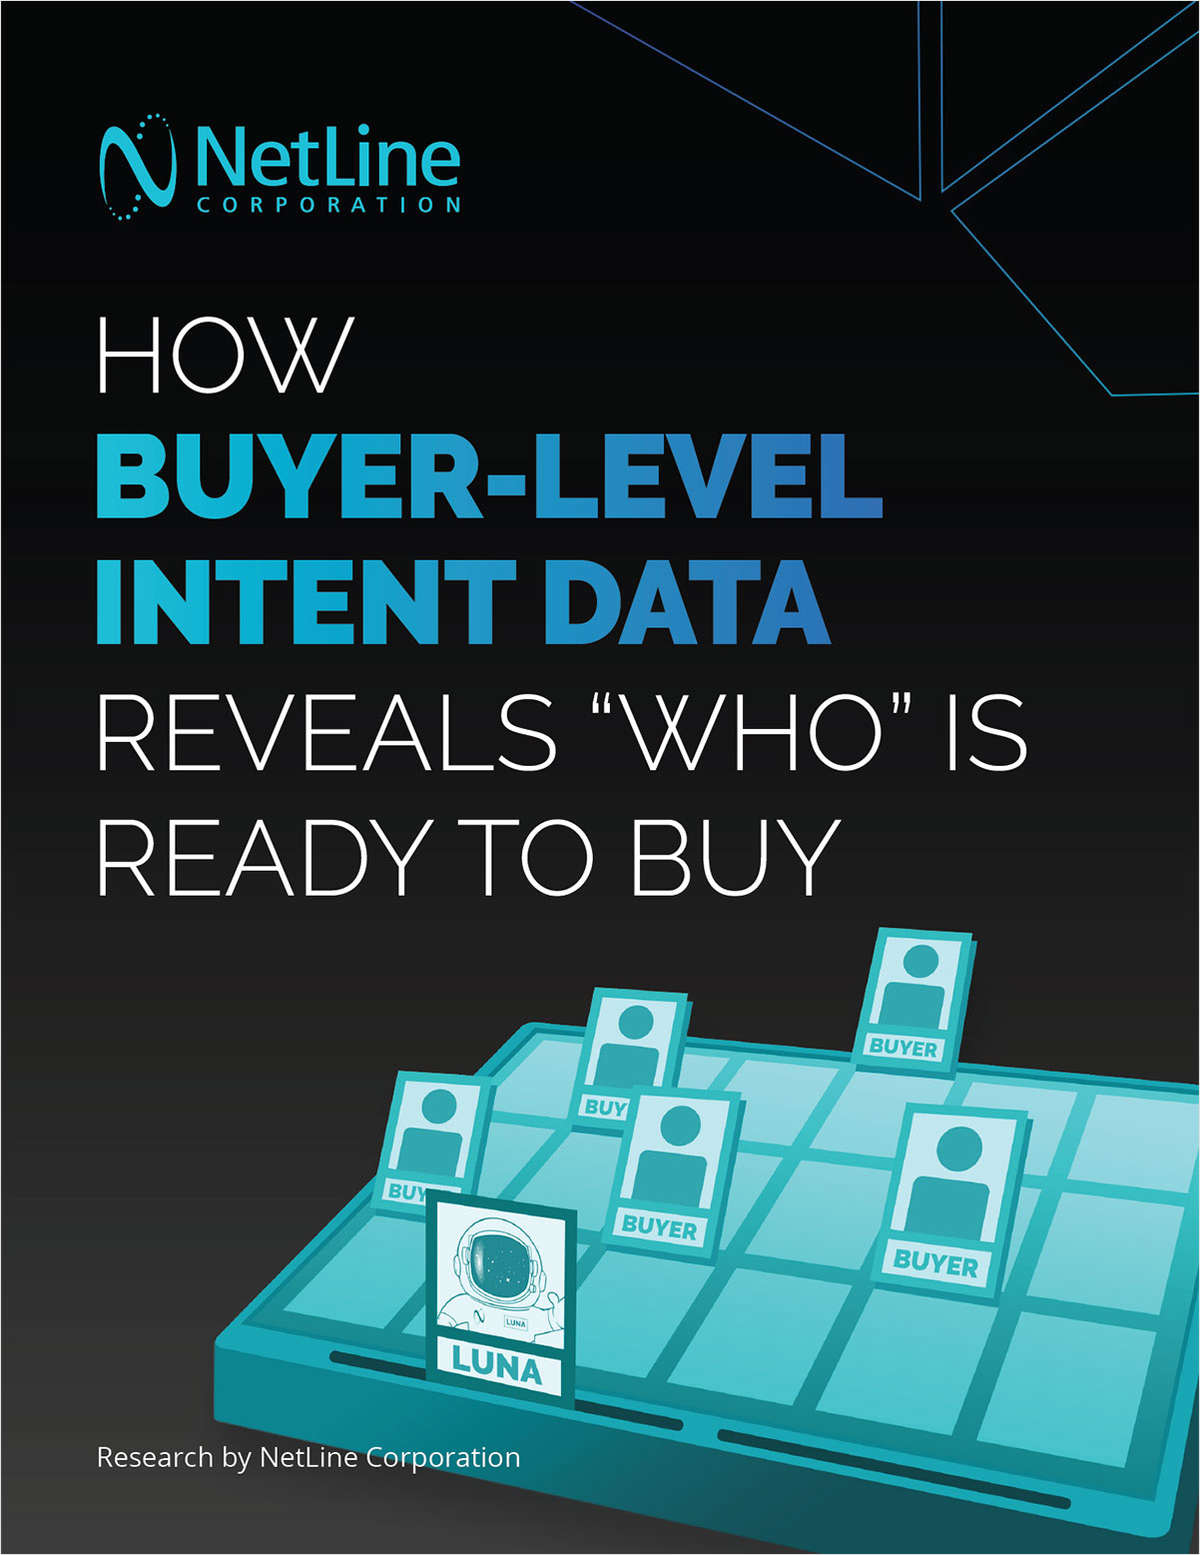 How Buyer-Level Intent Data Reveals Who is Ready to Buy